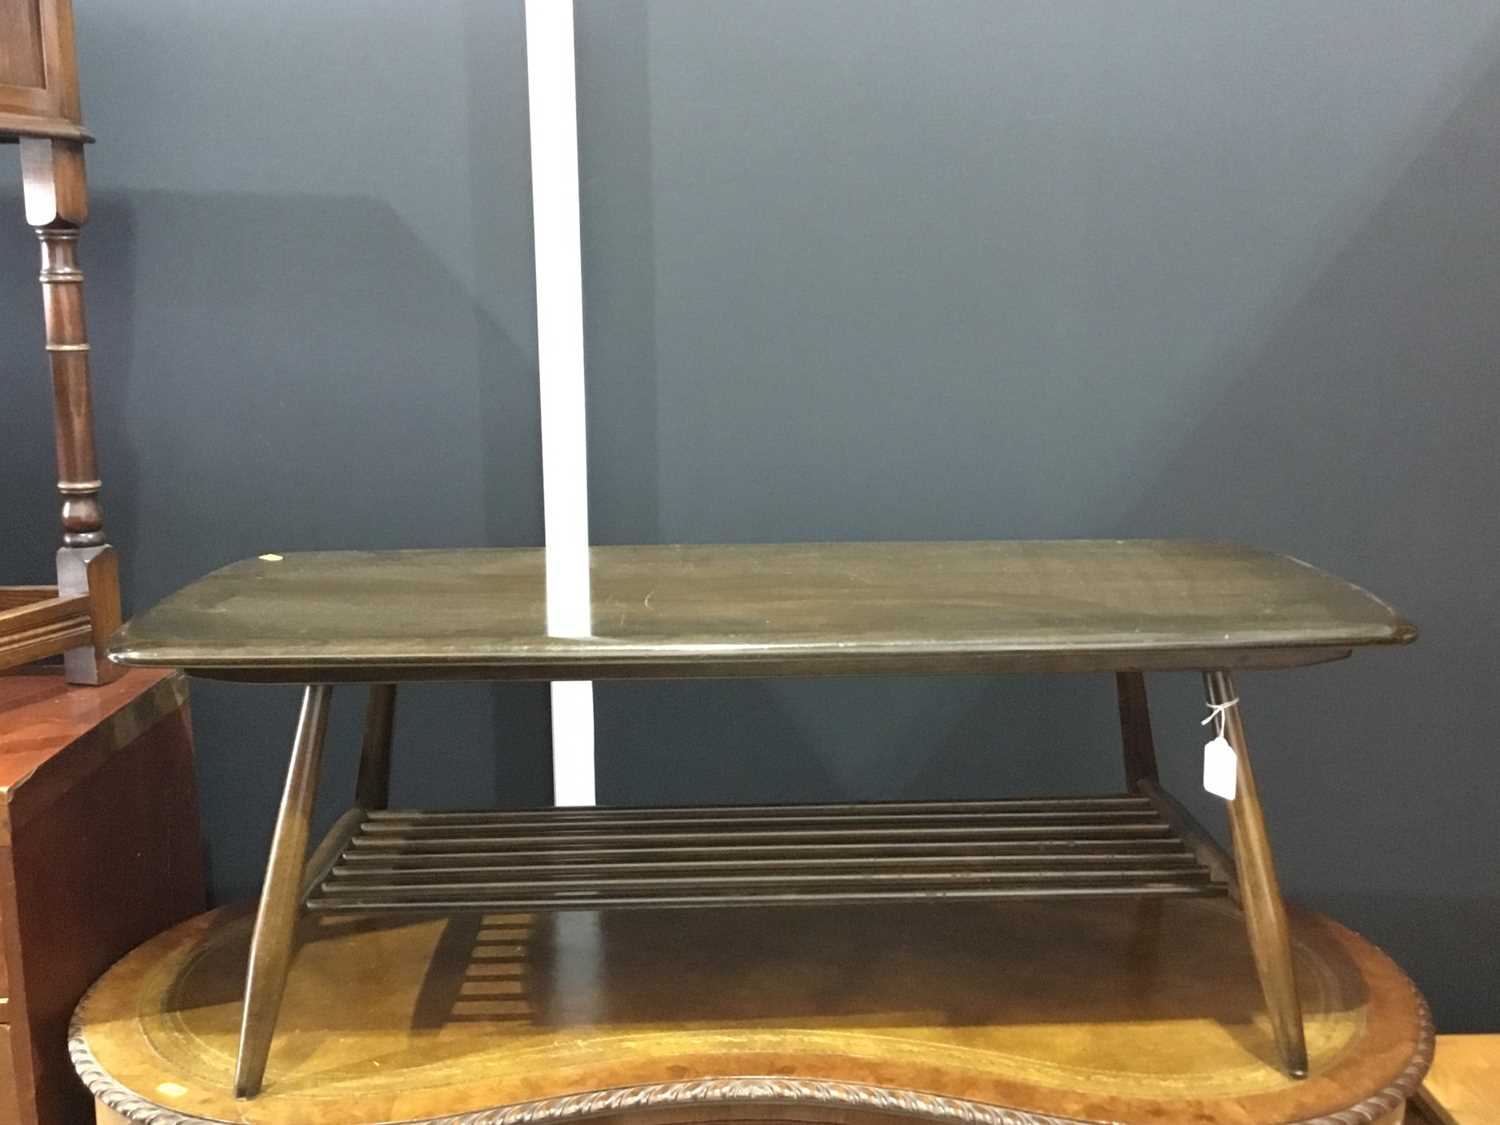 Lot 137 - Ercol dark wood coffee table of rectangular form on four turned legs joined by stretchers, 105 x 37 x 46cm